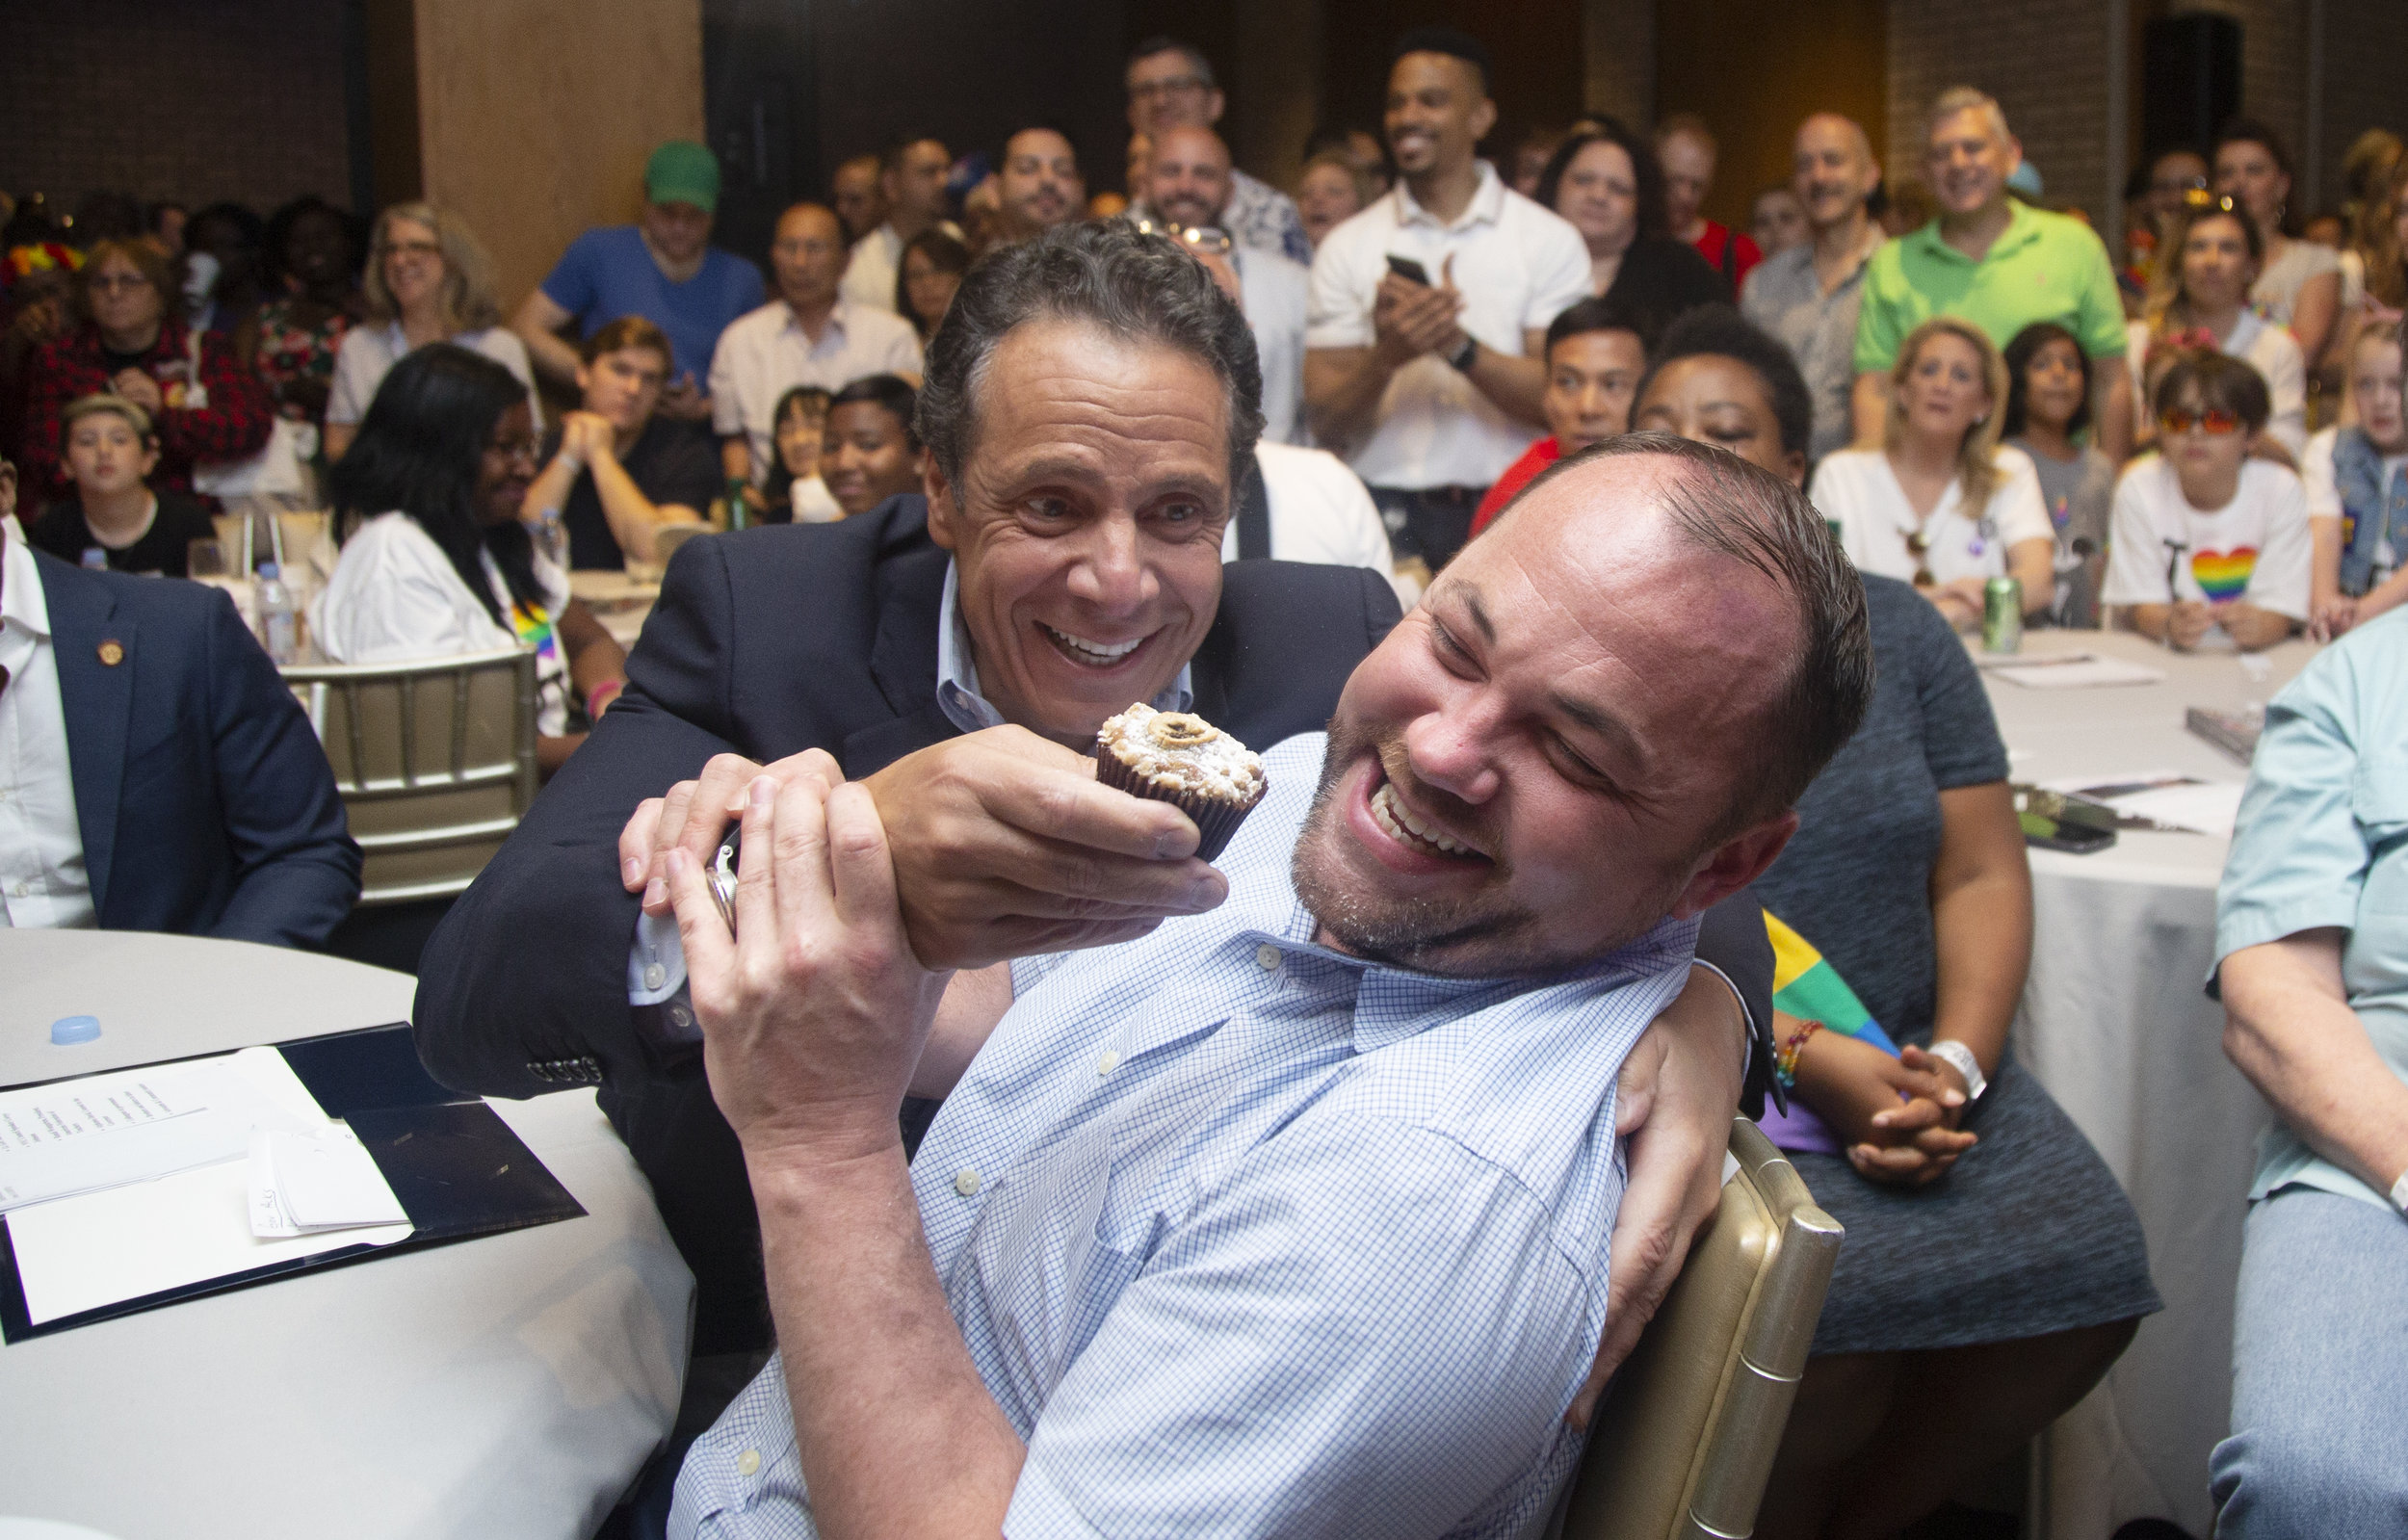 City Council Speaker Corey Johnson And Governor Andrew Cuomo Share A Moment During A LGBT Pride Breakfast Event